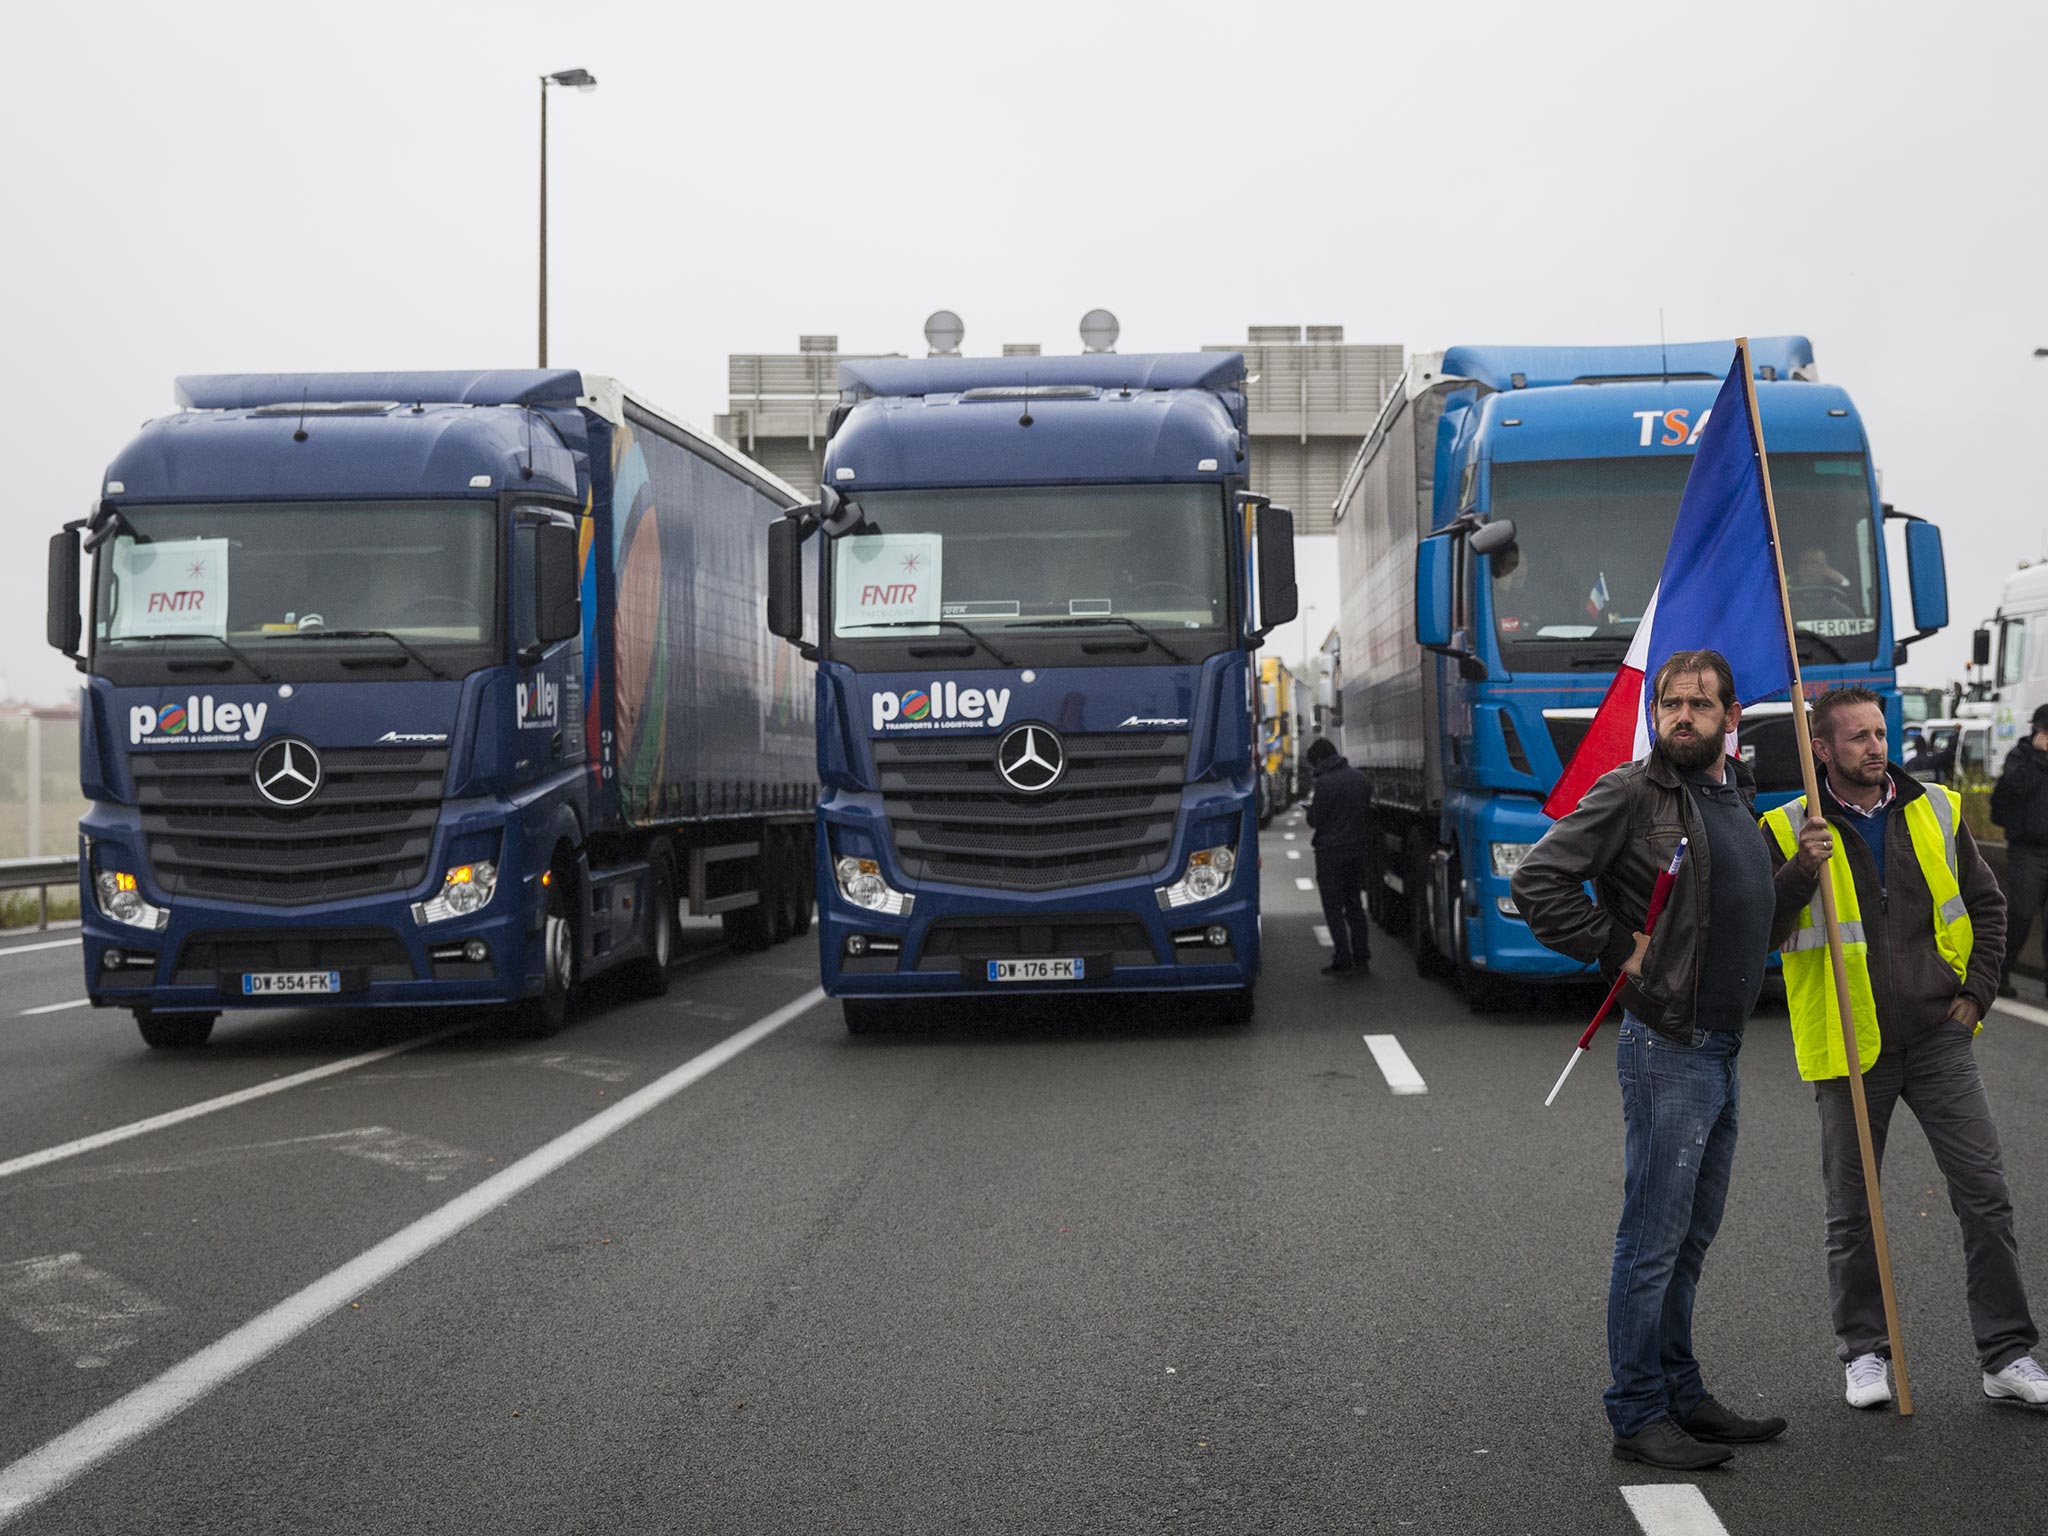 Lorries blockade the main road into the Port of Calais to protest against "The Jungle" refugee camp on 5 September, 2016